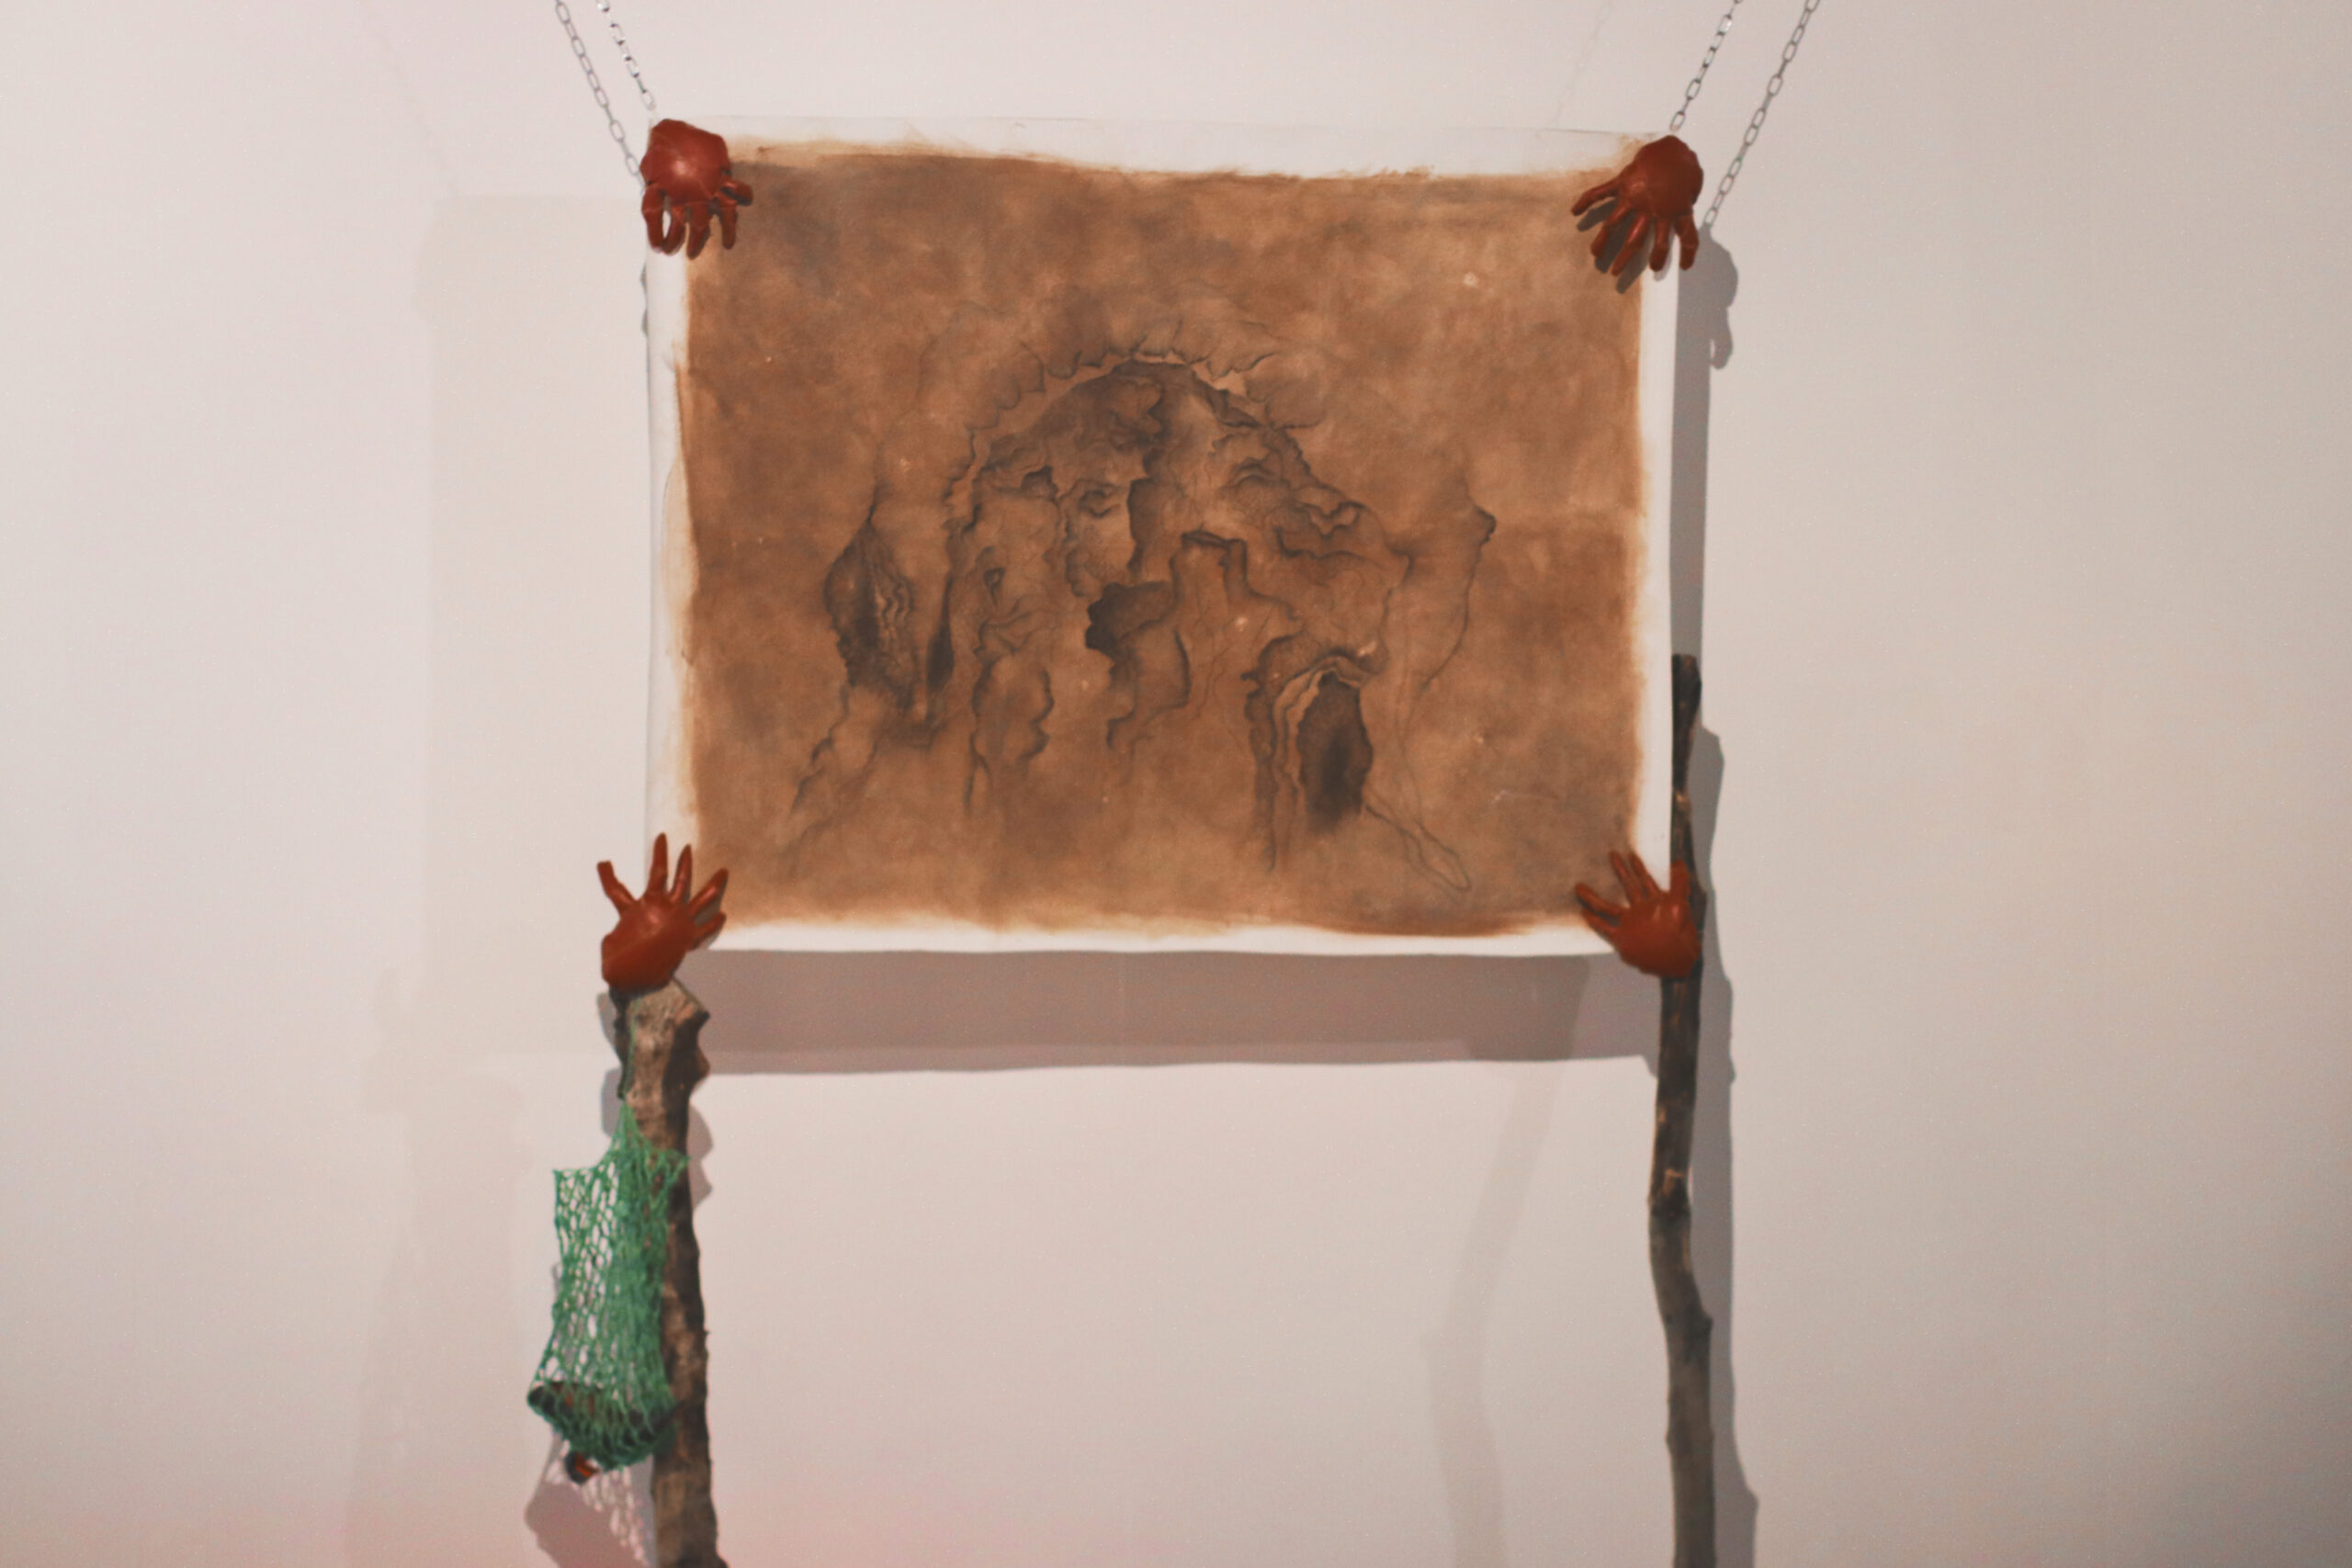 An image of a drawing on brown, distressed paper suspended by wires on top and gripped with hand-like clasps on the bottom.